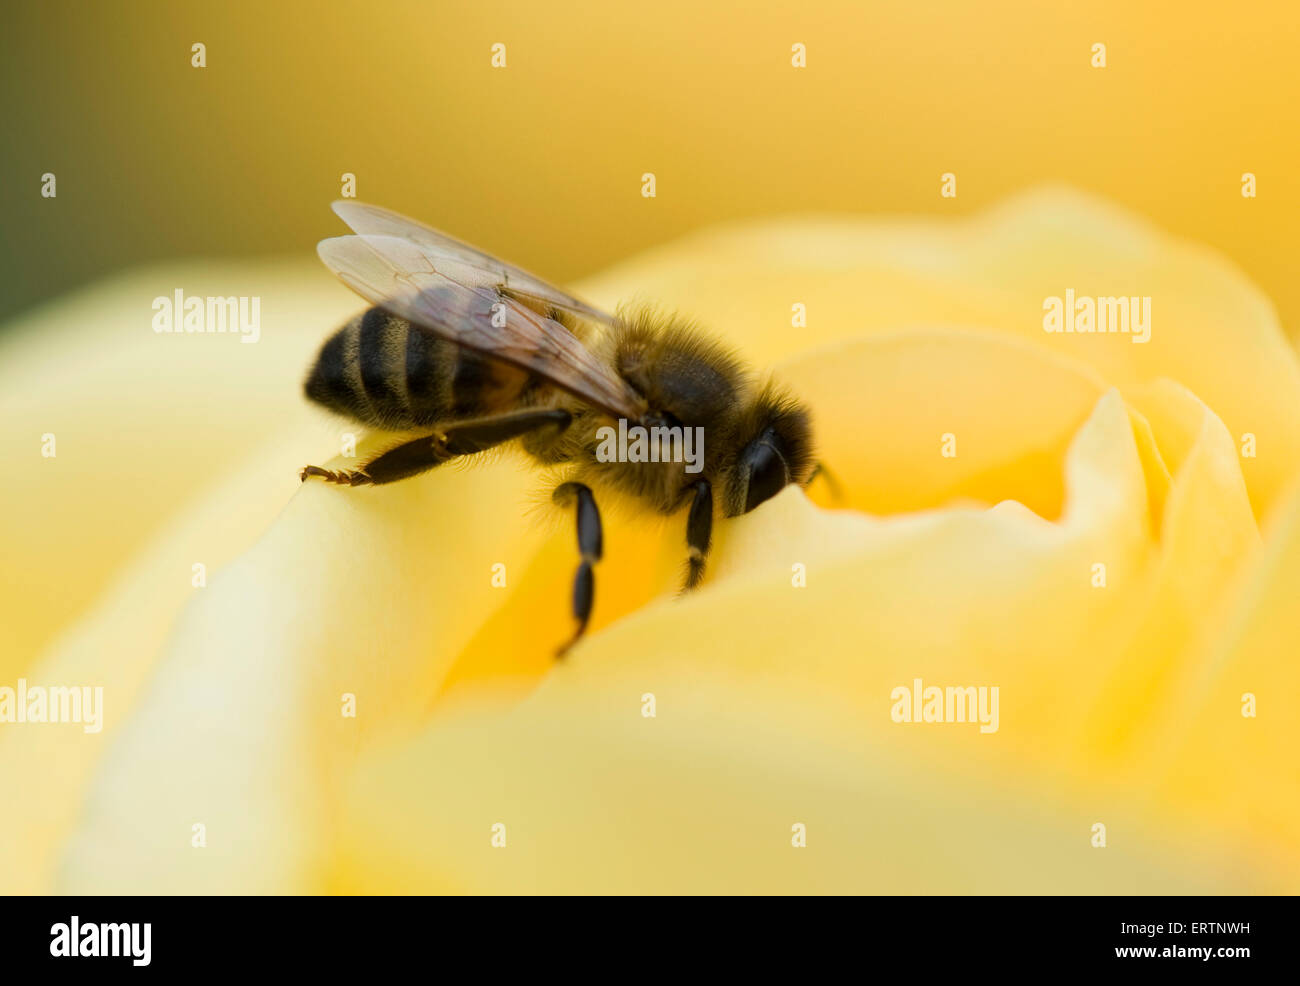 A honey bee, Apis mellifera, on a yellow rose bloom 'Arthur Bell' on a cool summer day Stock Photo